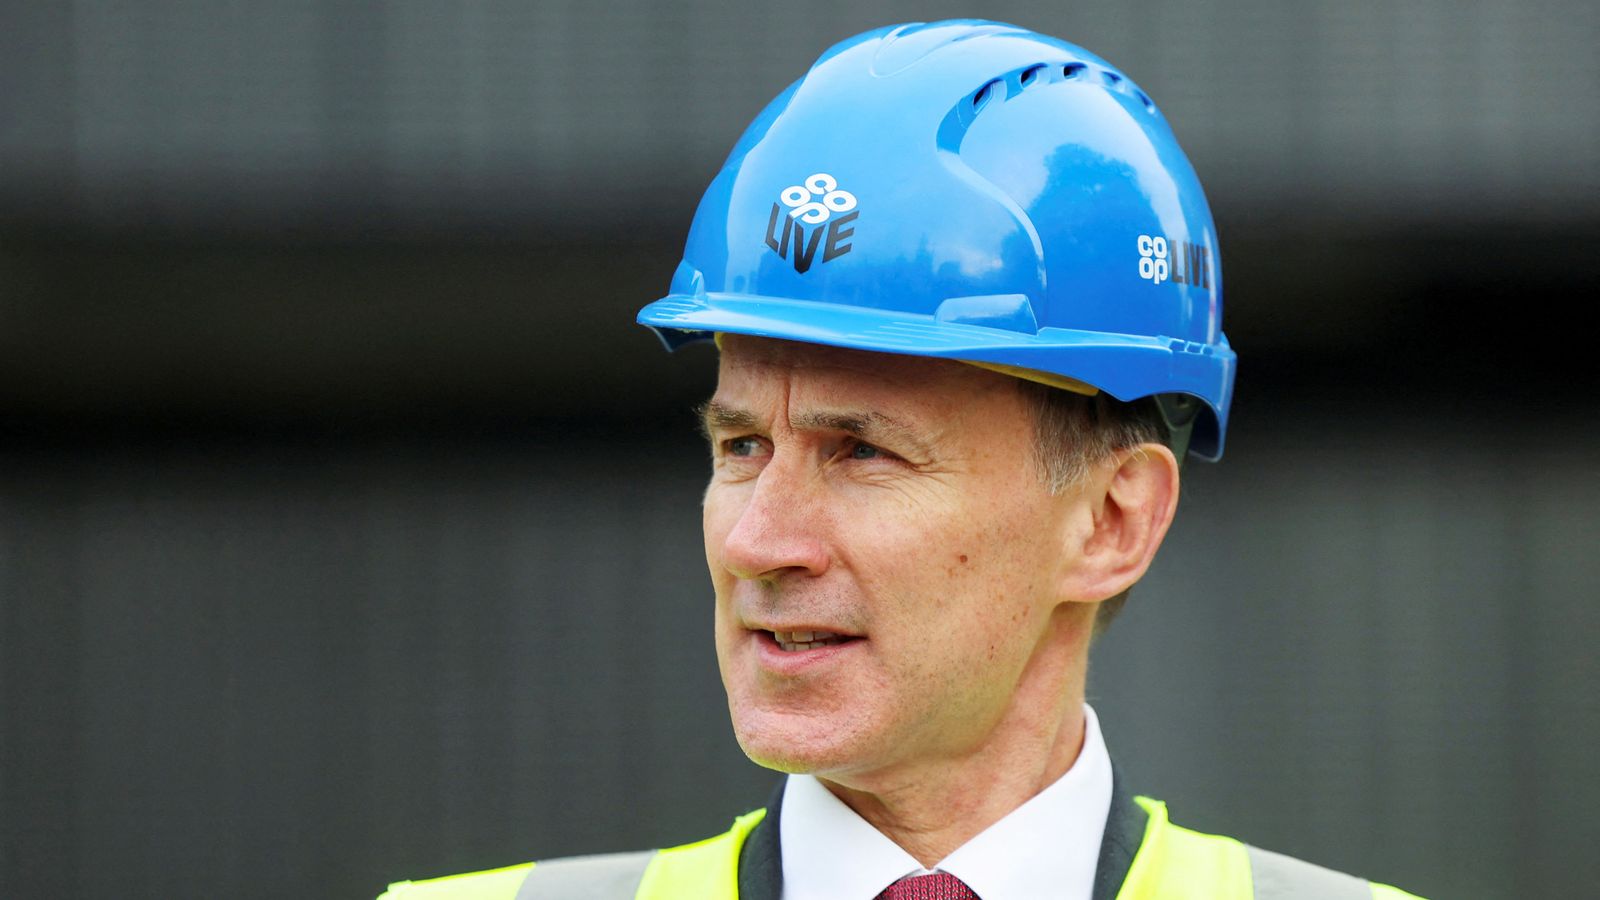 Chancellor Jeremy Hunt to focus autumn assertion on value of dwelling and boosting development